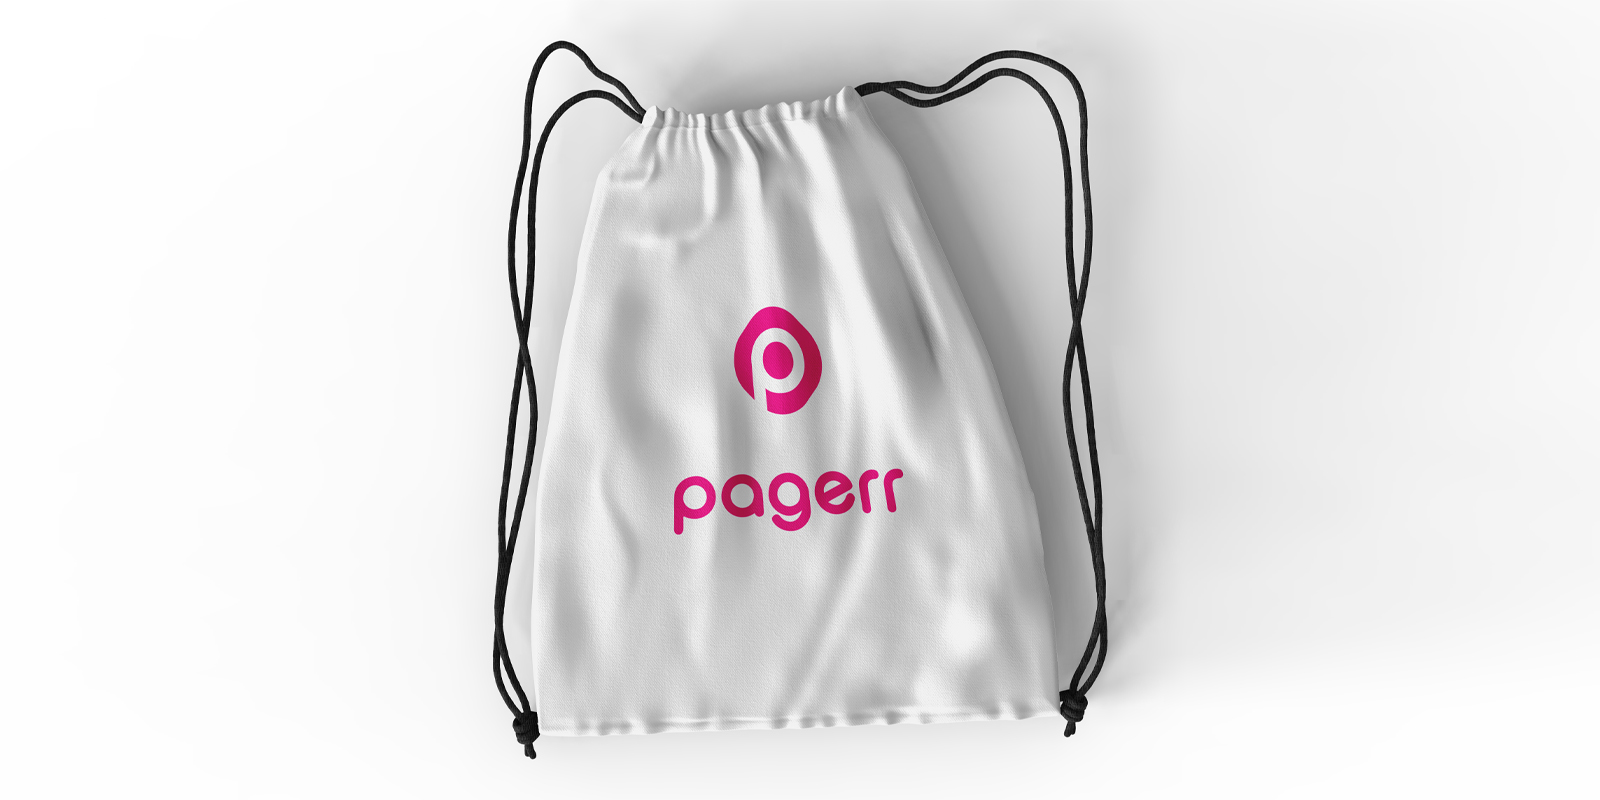 Drawstring backpacks in Warsaw - Print with Pagerr